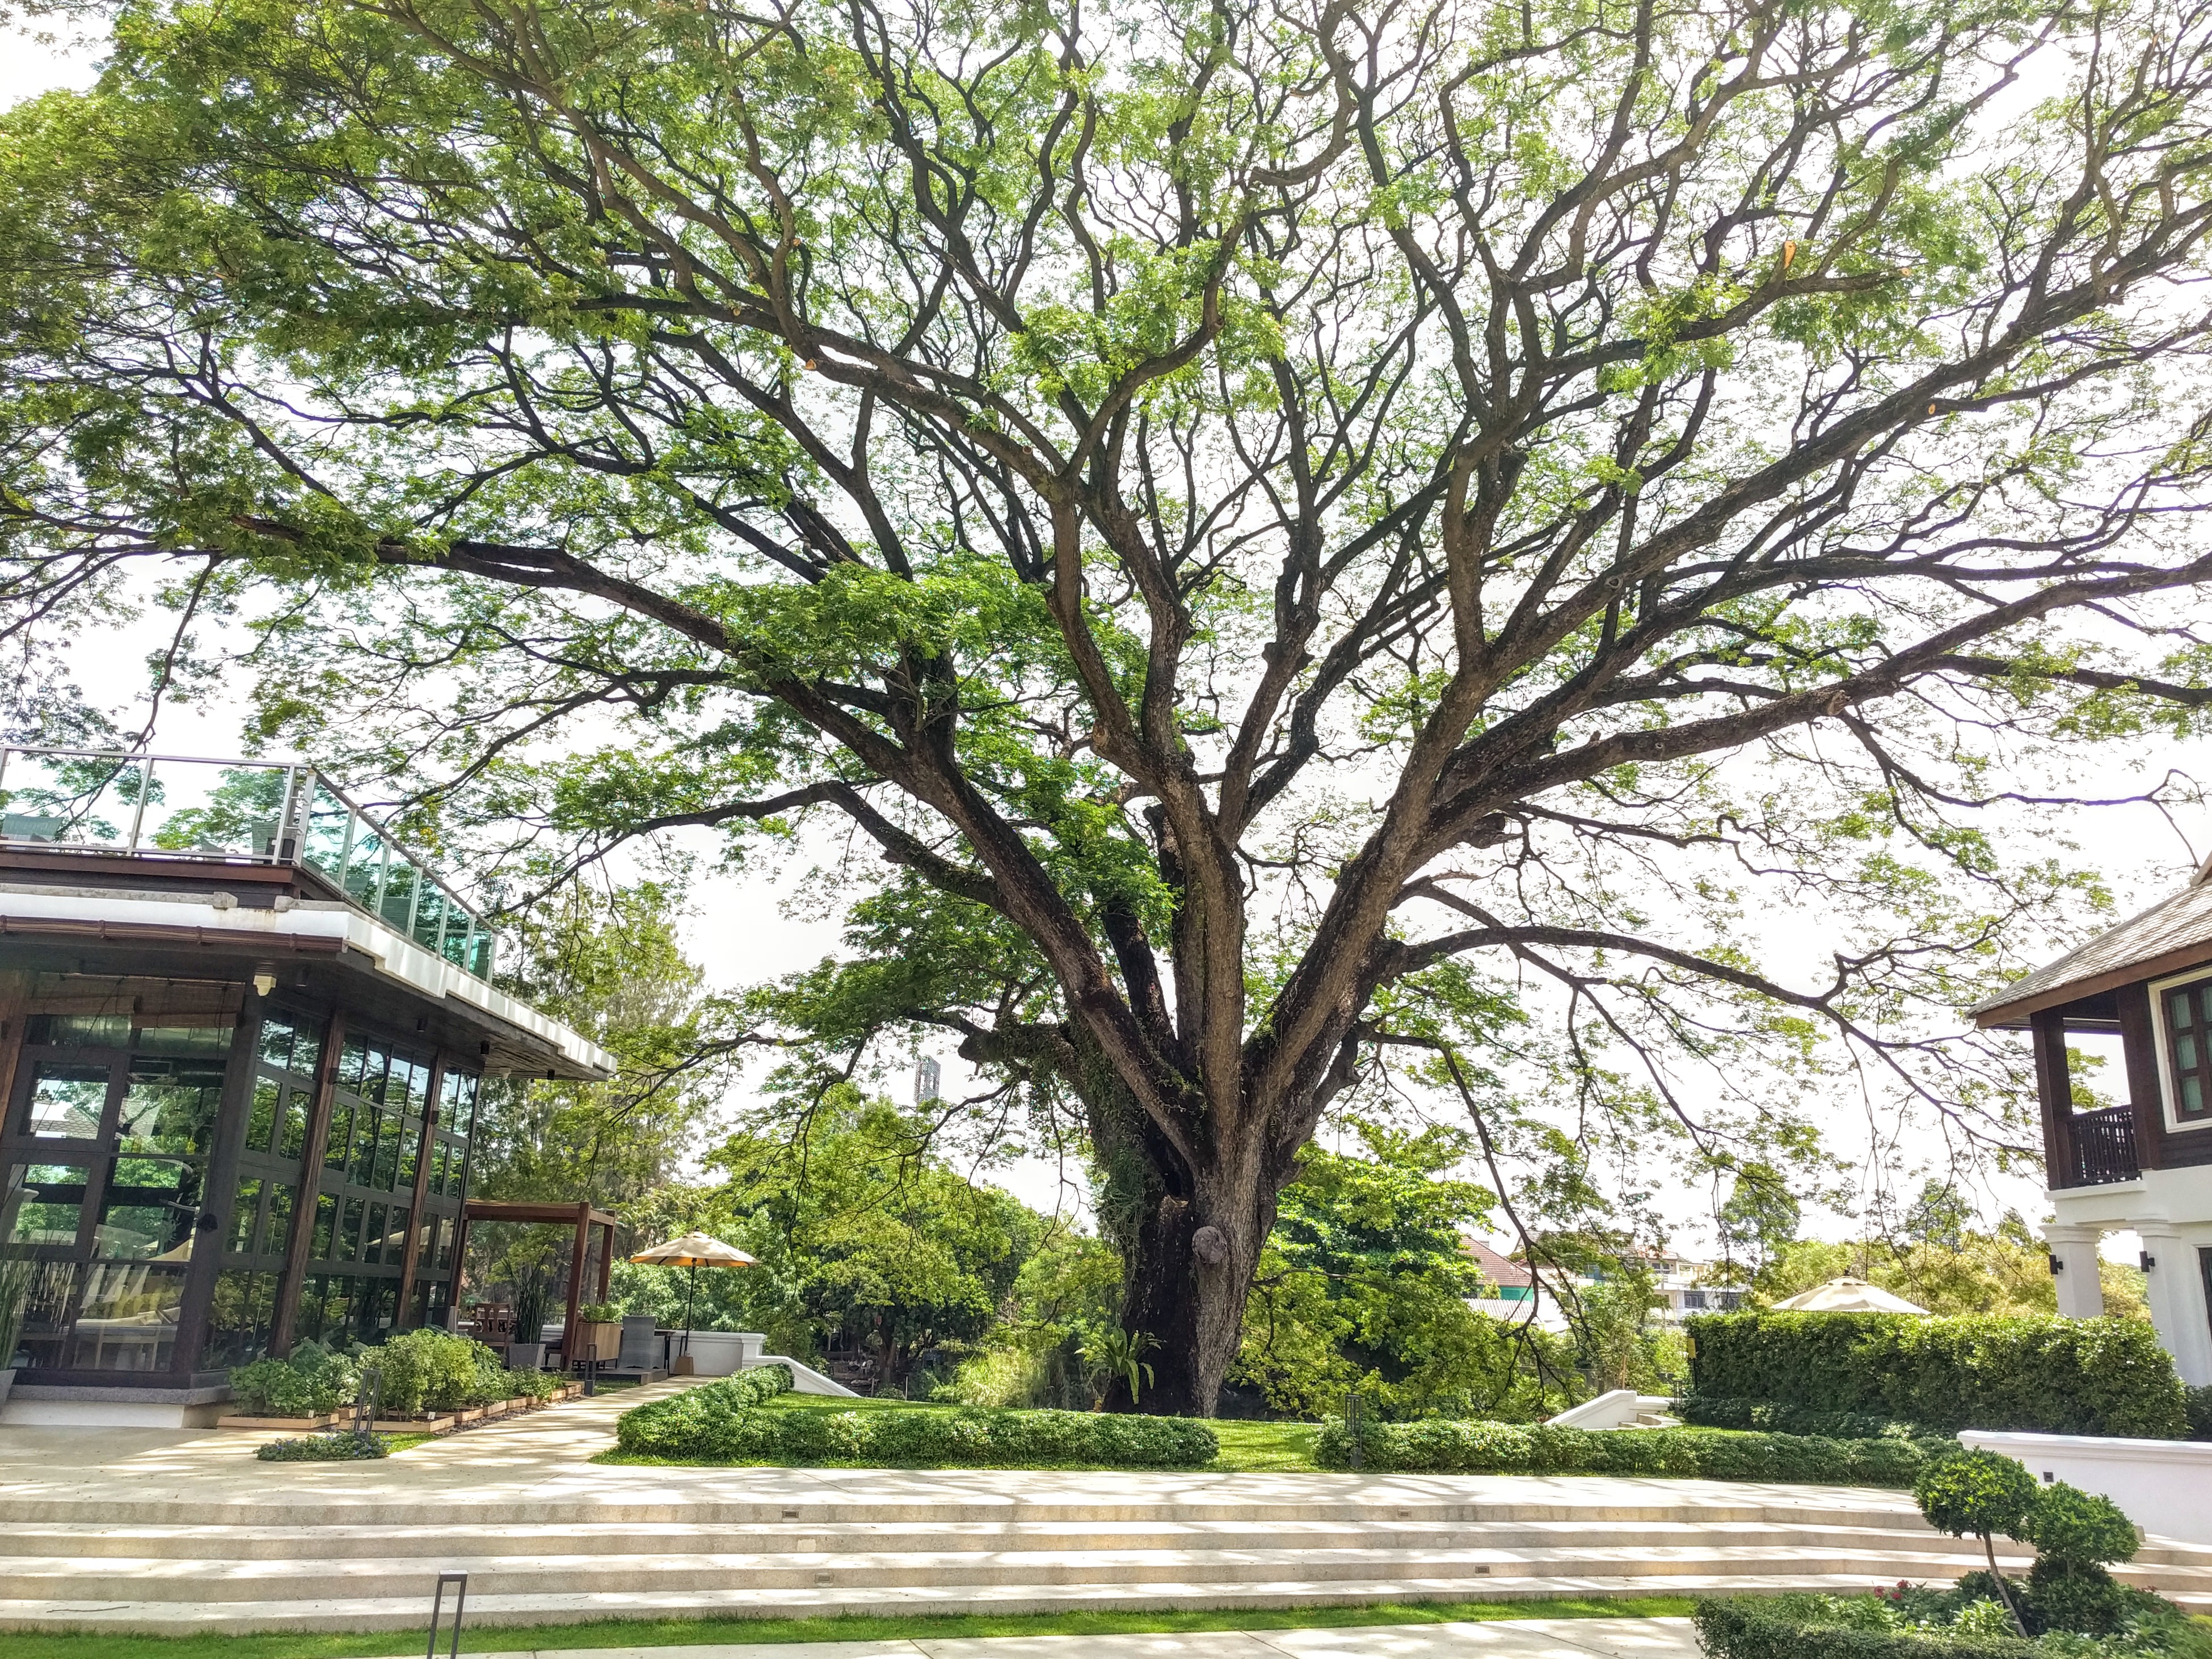 Trees of Chiang Mai